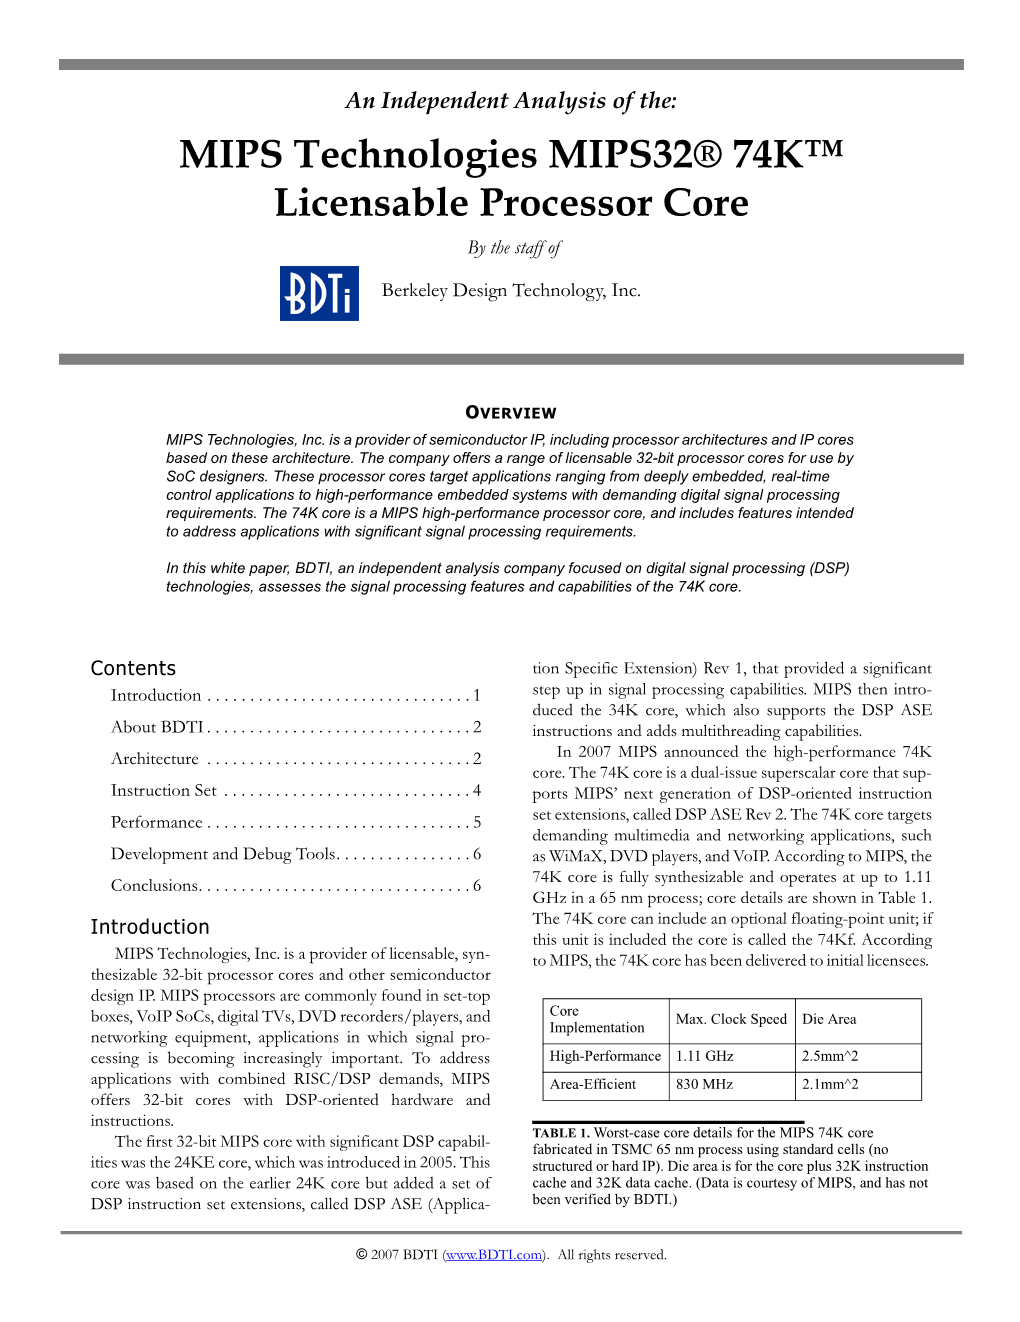 Analysis of the MIPS Technologies MIPS32® 74K™ Licensable